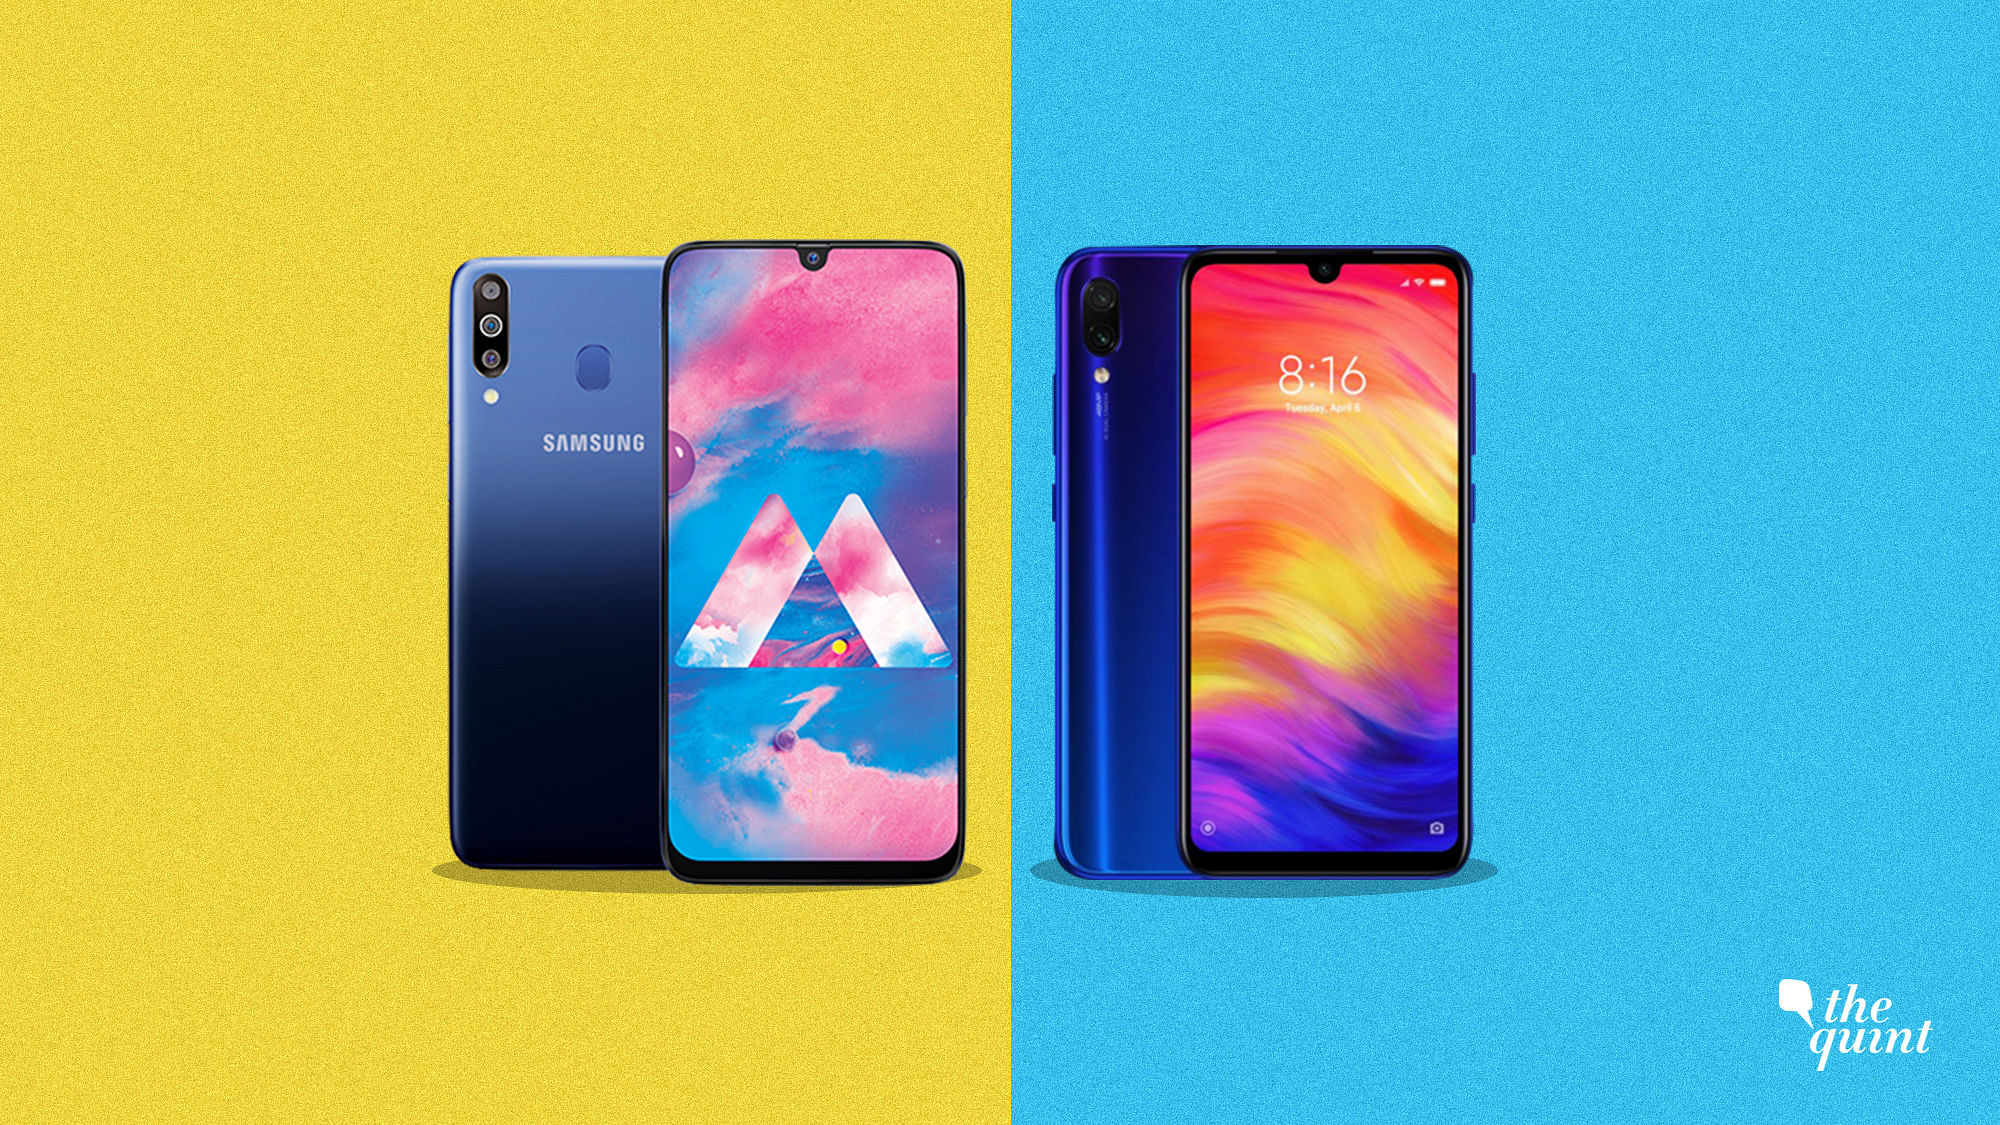 The Samsung Galaxy M30 (left) and the Redmi Note 7 Pro (right)